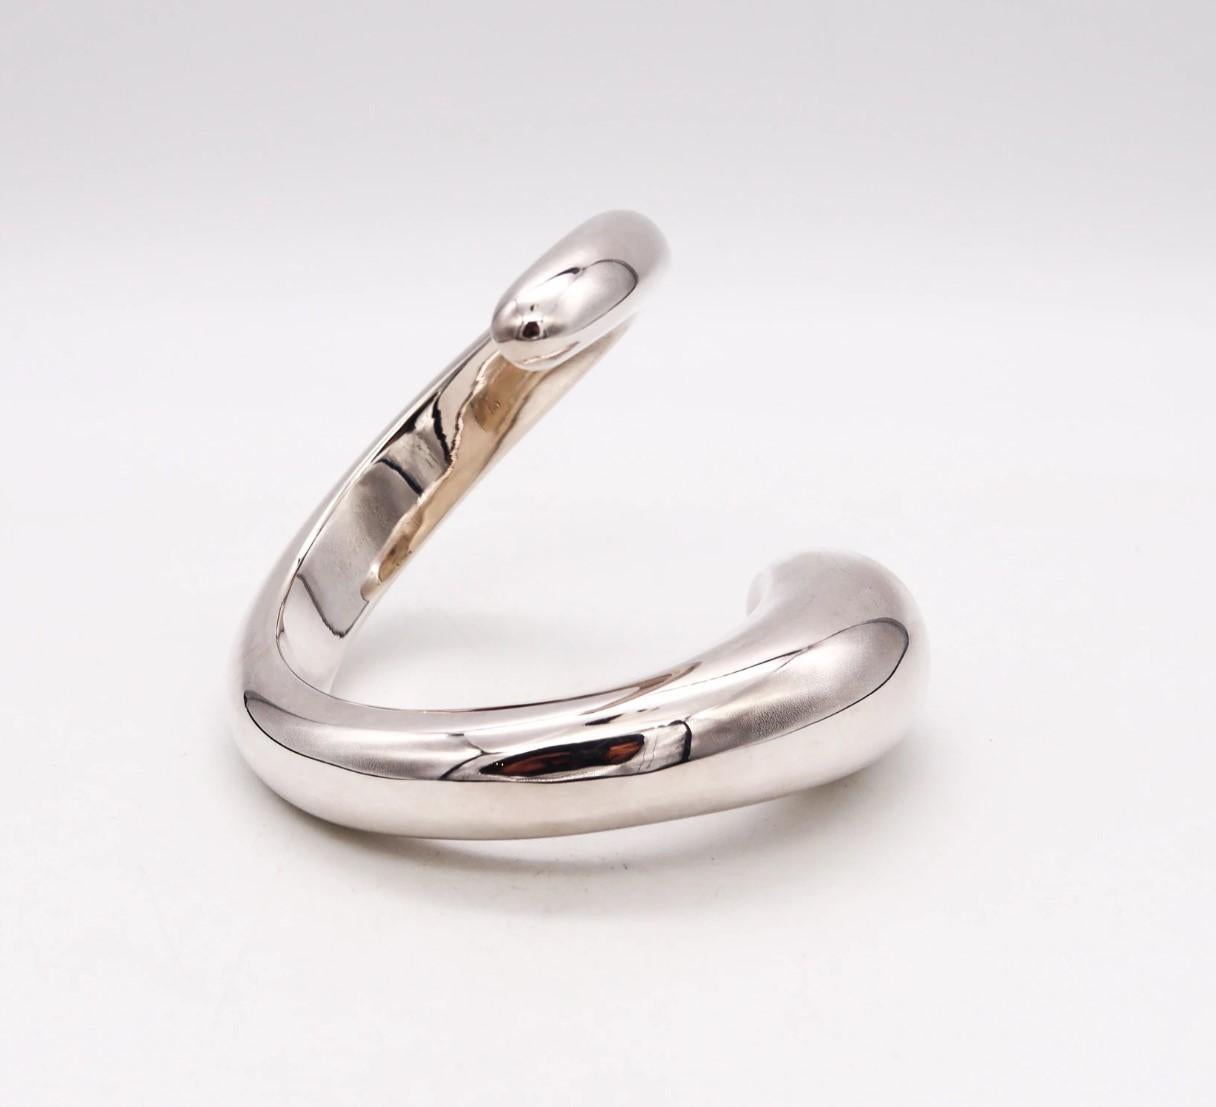 Geometric bangle bracelet designed by Monica Coscioni. 

Beautiful and sleek contemporary piece, created in Orvieto Italy at the jewelry atelier of the designer Monica Coscioni. This modern geometric free form bangle-bracelet has been crafted in